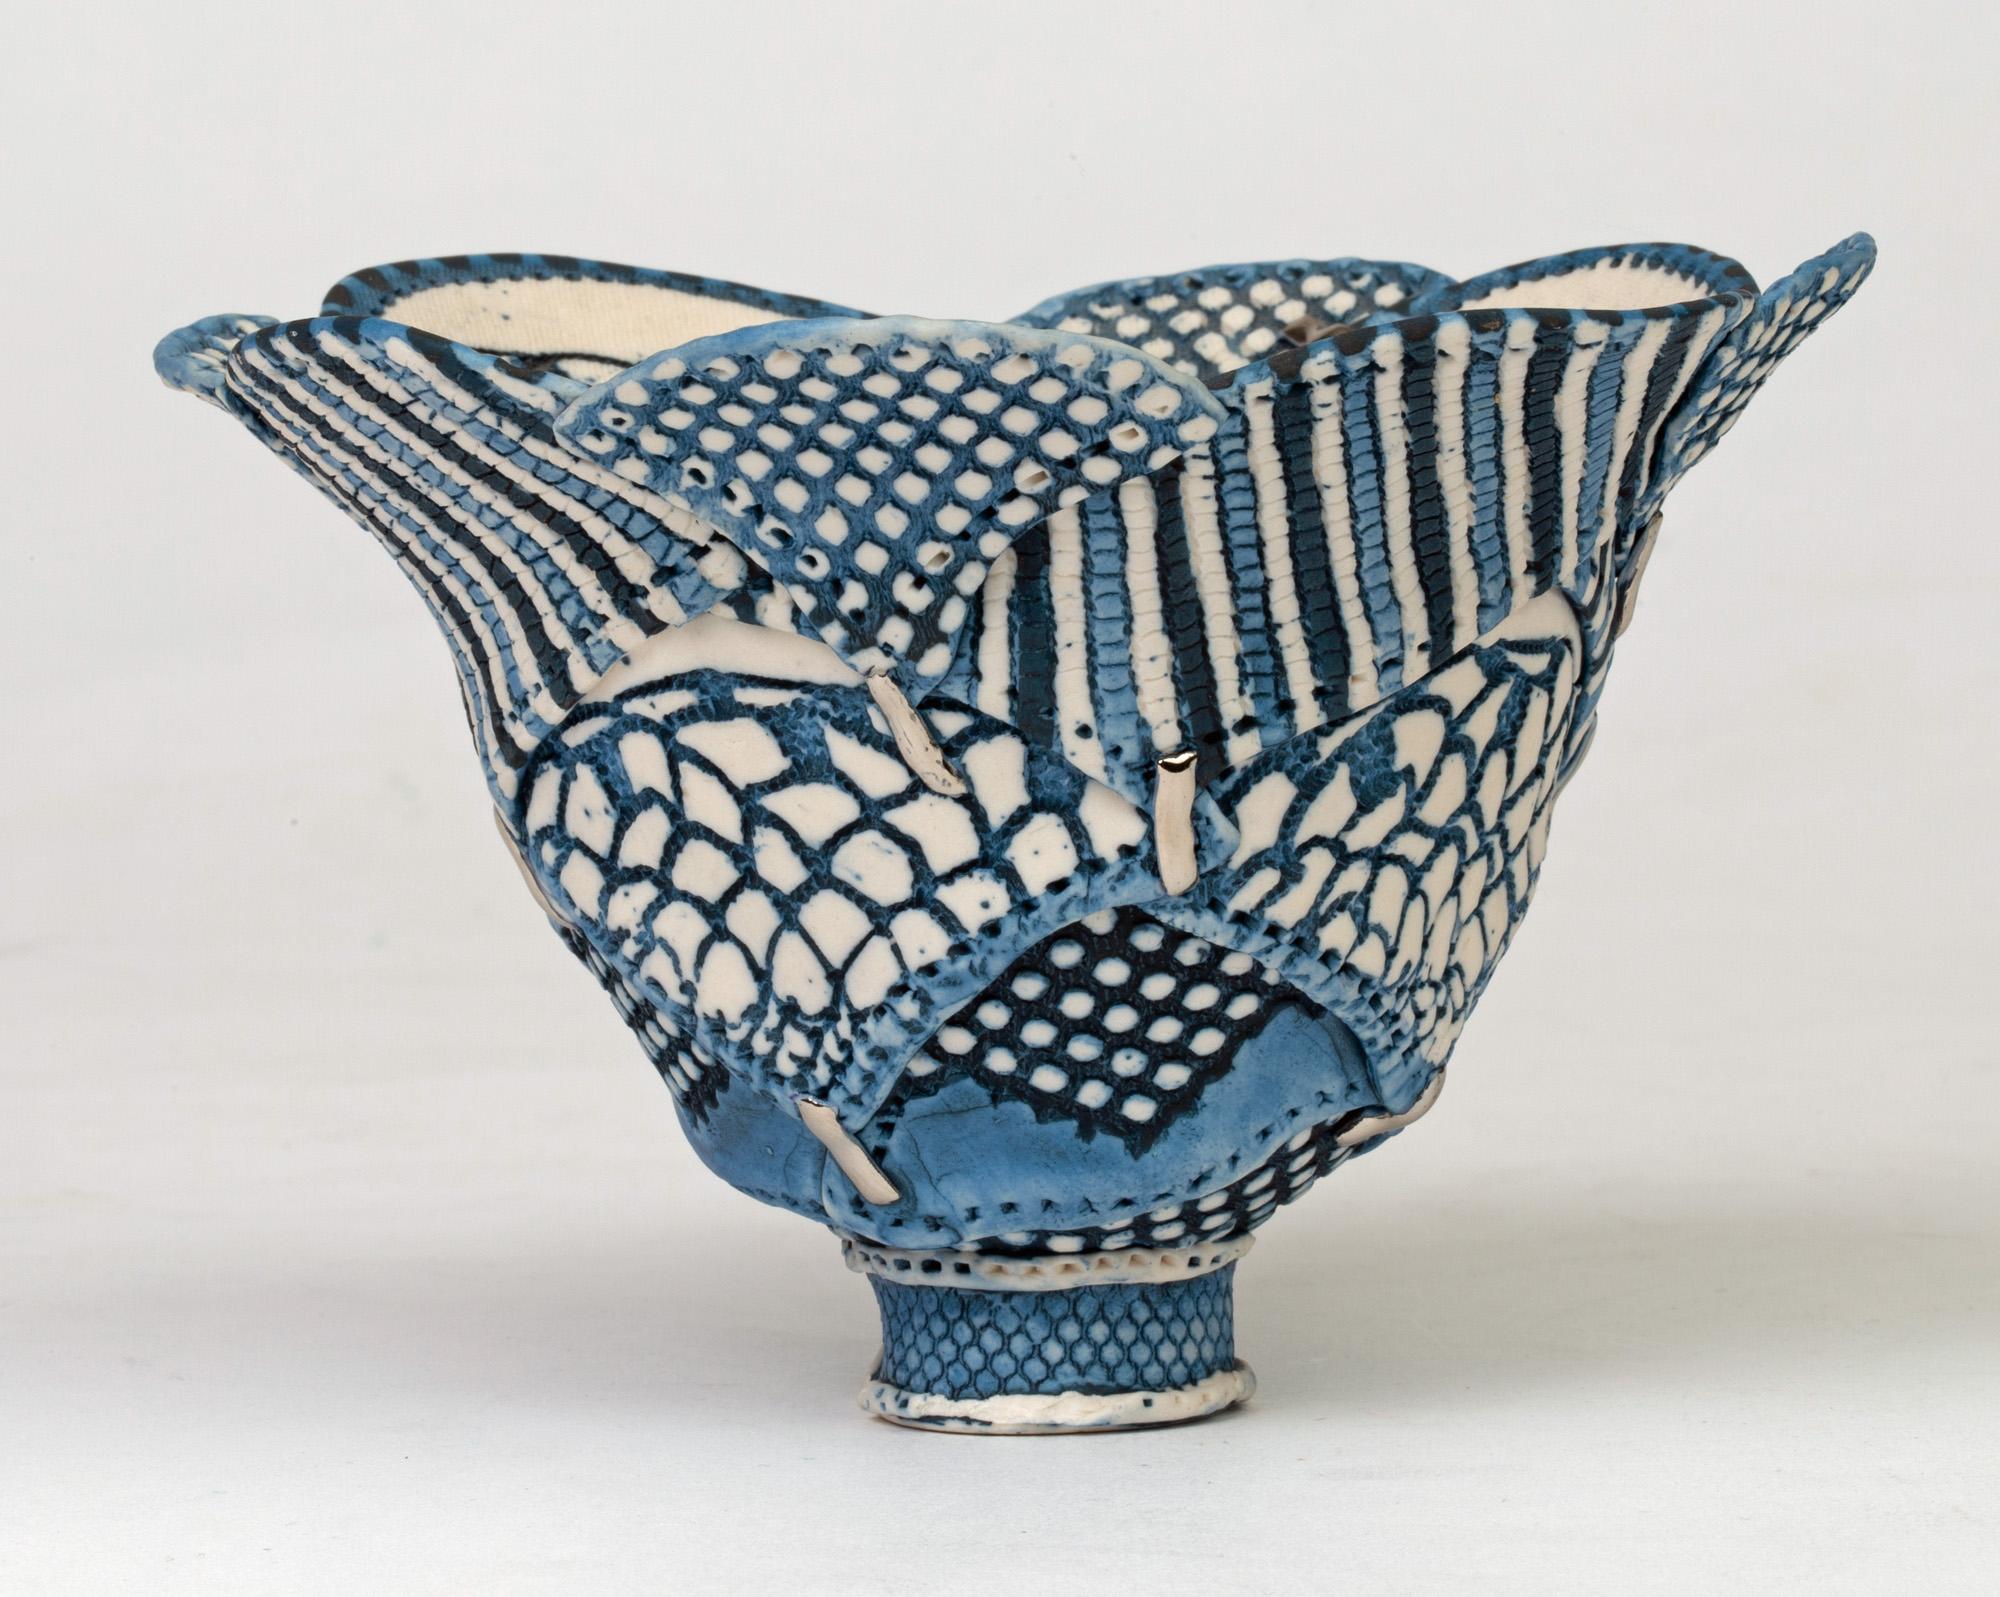 From an extensive collection of studio pottery is this stylish and unusual porcelain bowl in a textile inspired pattern by Linda Chew. The bowl is made of petal like overlapping sections each in varying blue patterns on a white ground joined by